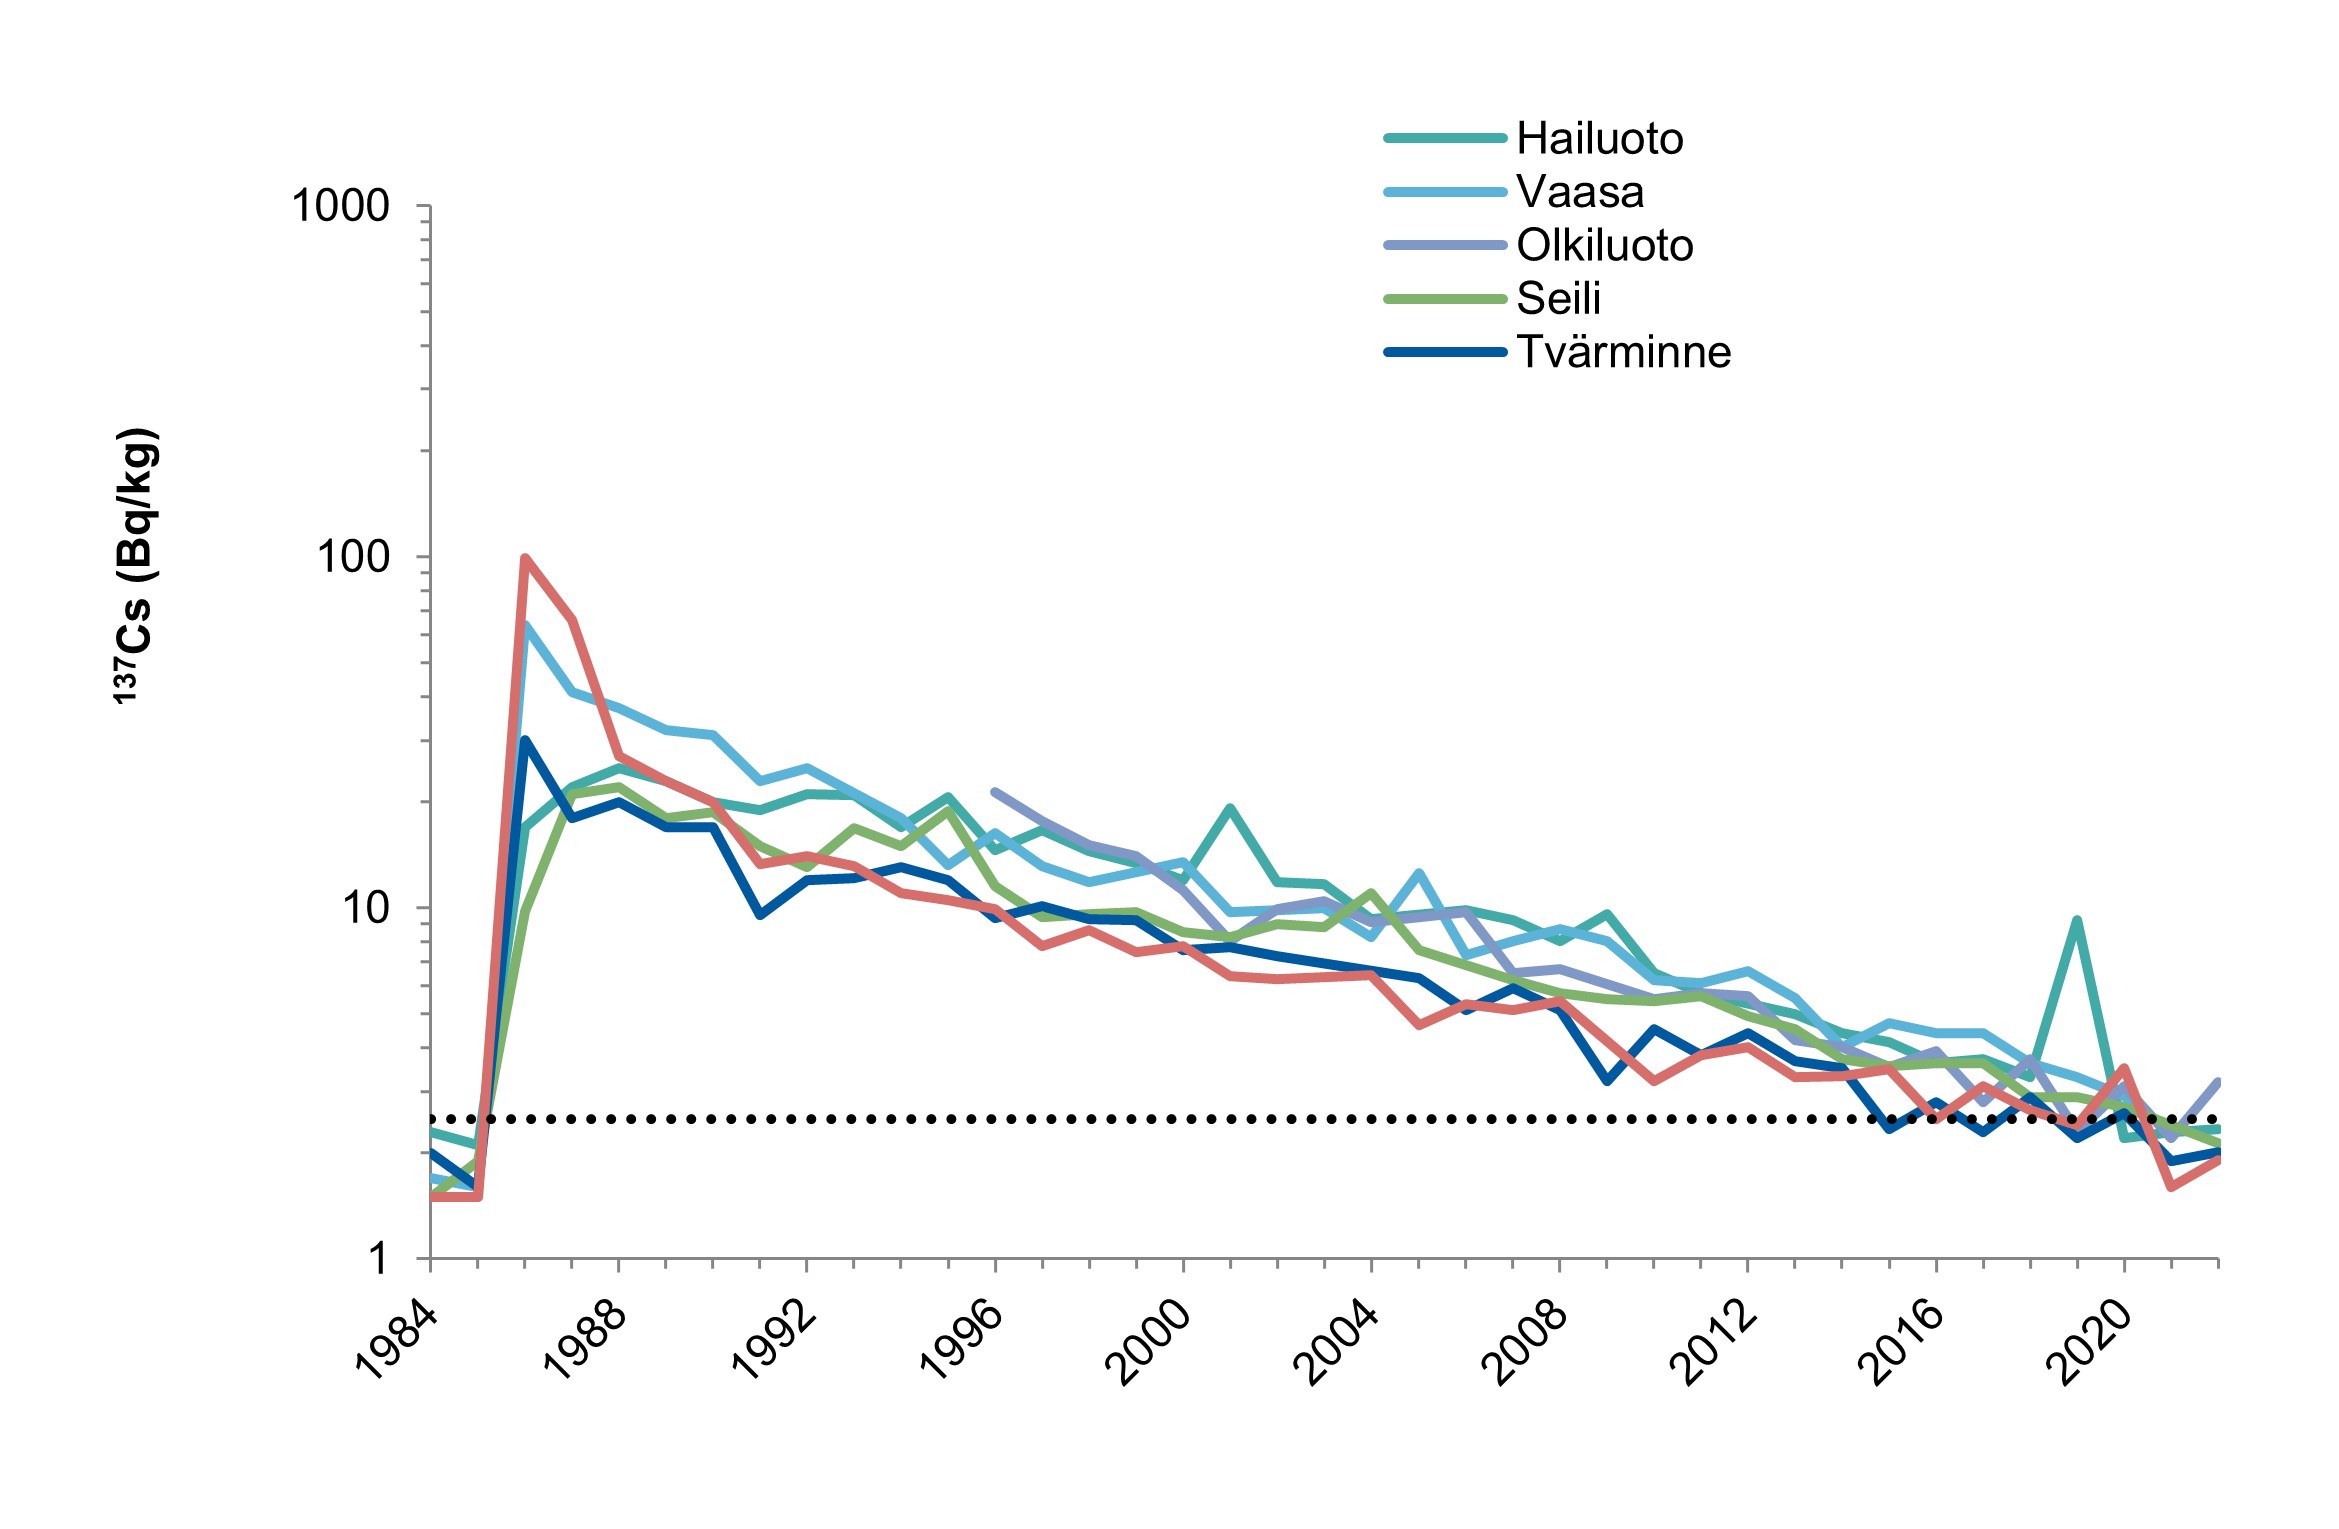 Graph of Cs-137 activity concentrations in herring in different parts of the Baltic Sea from 1984 to 2022. The activity concentrations in Baltic herring is monitored in six sampling areas in Hailuoto, Vaasa, Olkiluoto, Seili, Tvärminne and Loviisa. Due to the Chernobyl nuclear power plant accident, Cs-137 activity concentrations increased approximately fiftyfold compared with the previous years in the mid-1980s. Concentrations have been declining gradually and are now almost at tolerance levels. The tolerance level is set at the average level detected before the Chernobyl nuclear power plant accident.